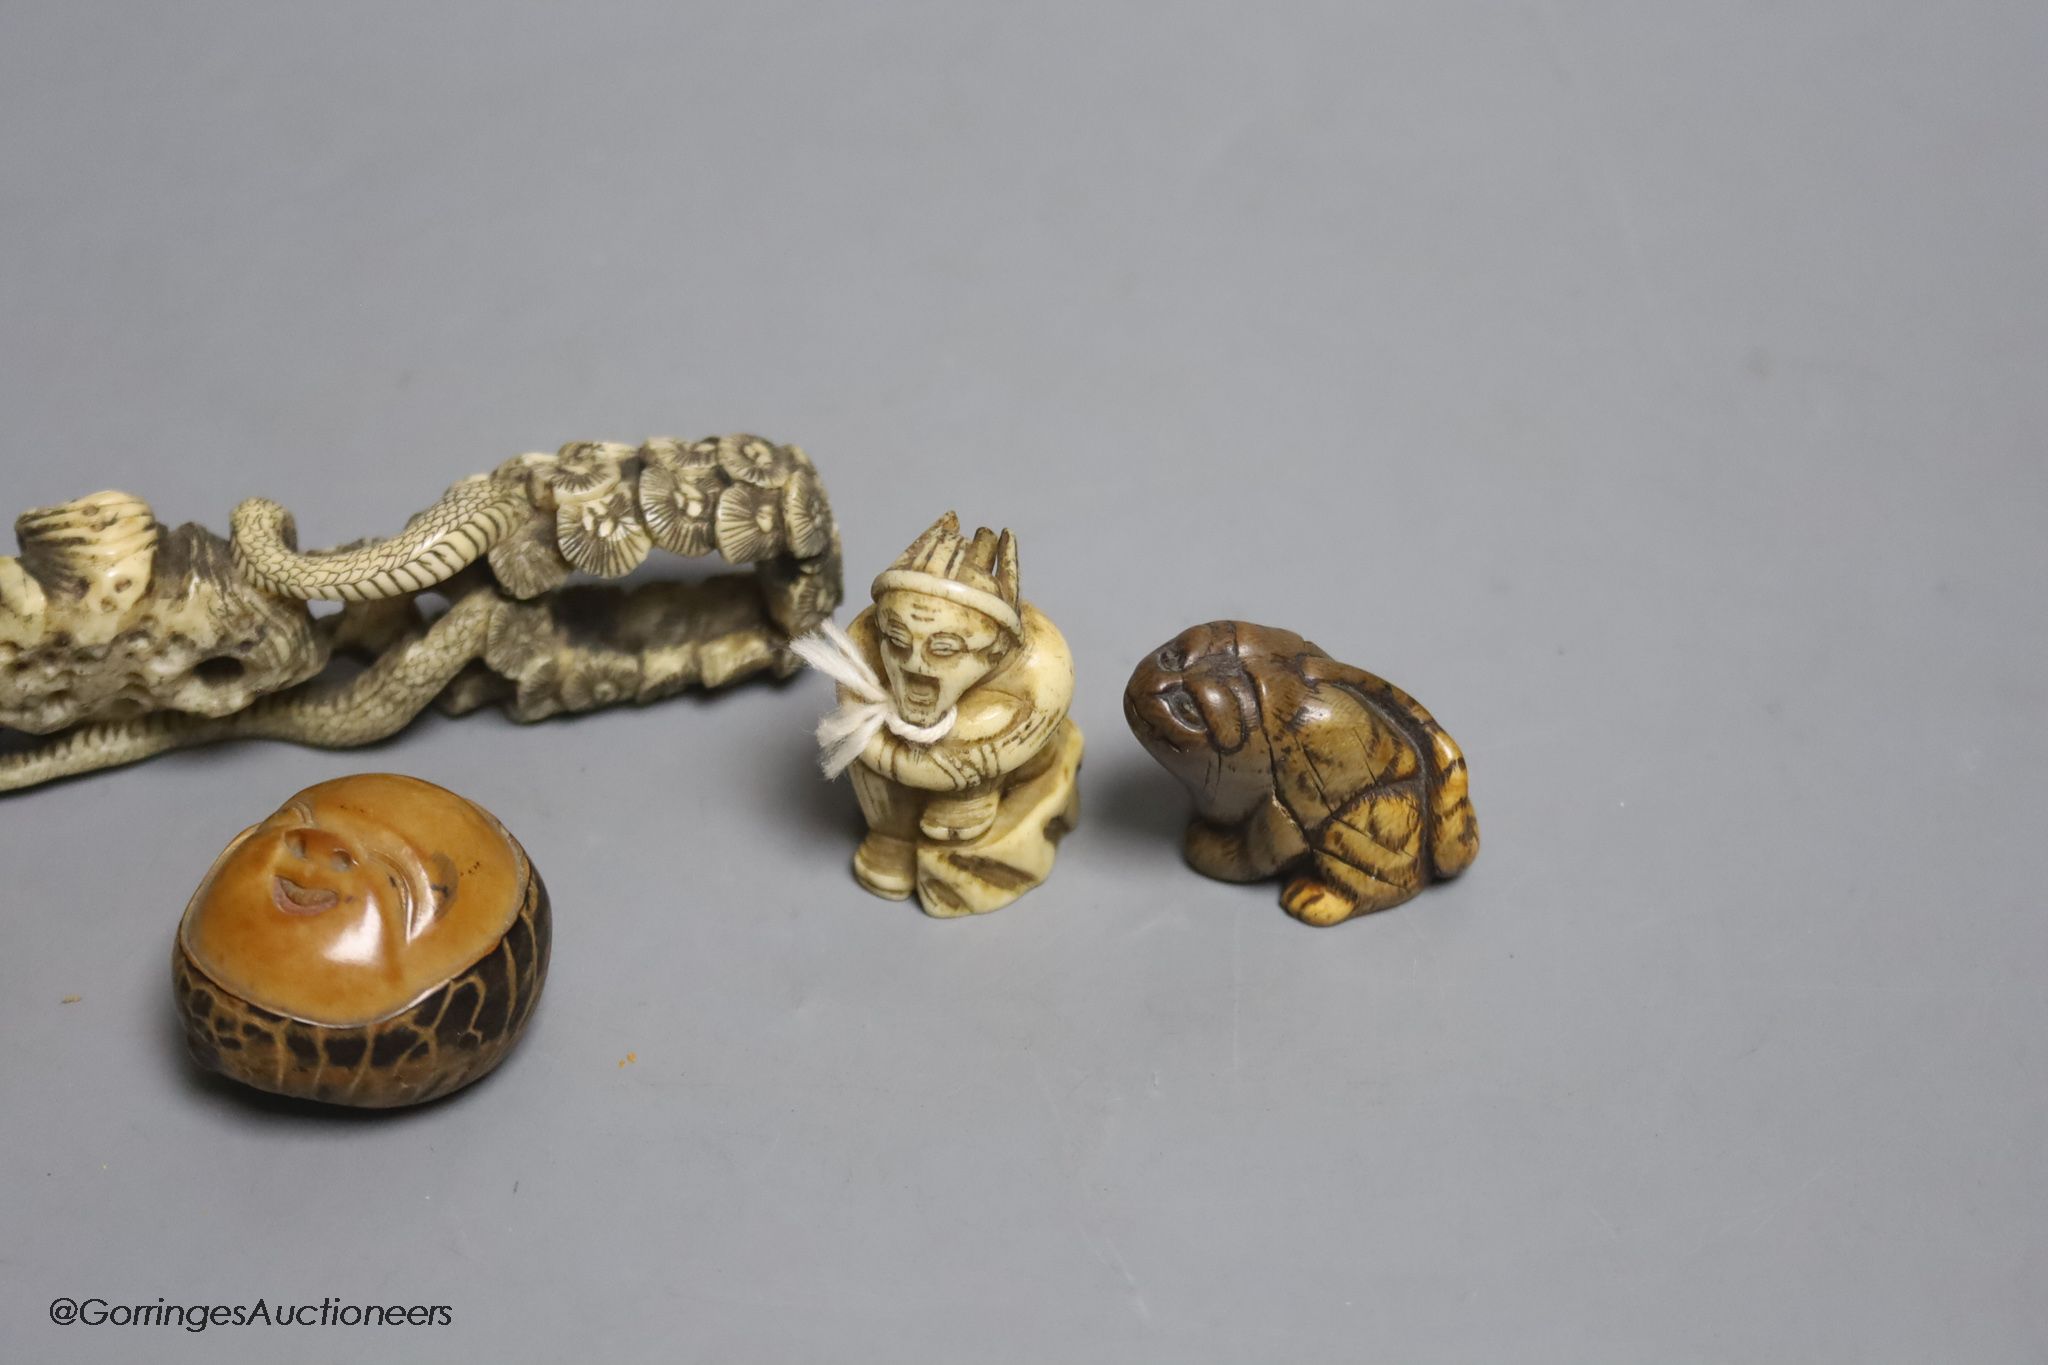 Two Japanese stag antler netsuke, a stained ivory tiger netsuke, a walrus ivory carving and a nut mask netsuke